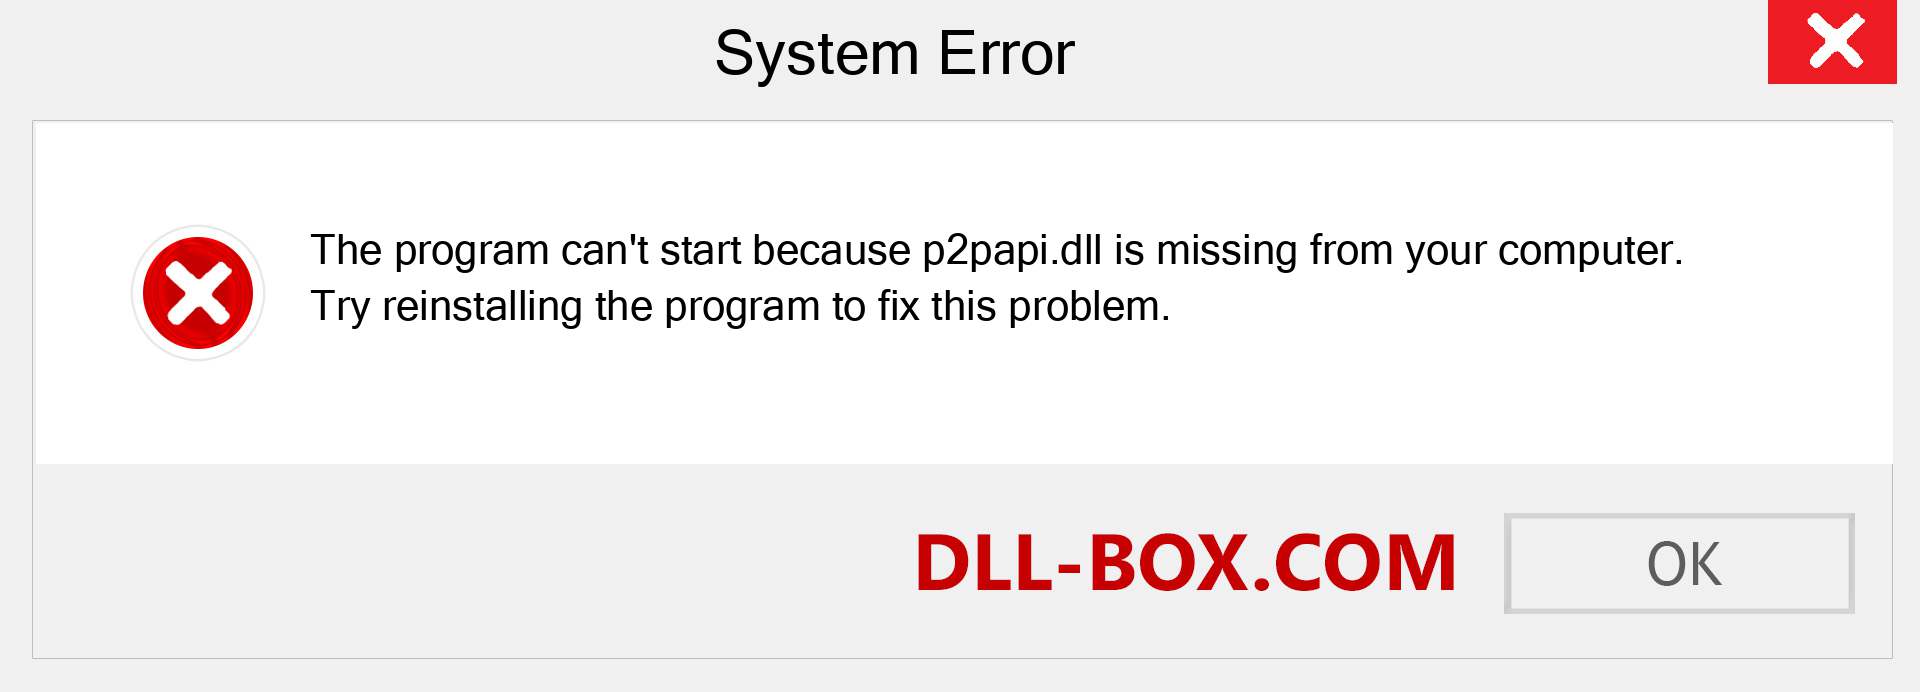  p2papi.dll file is missing?. Download for Windows 7, 8, 10 - Fix  p2papi dll Missing Error on Windows, photos, images